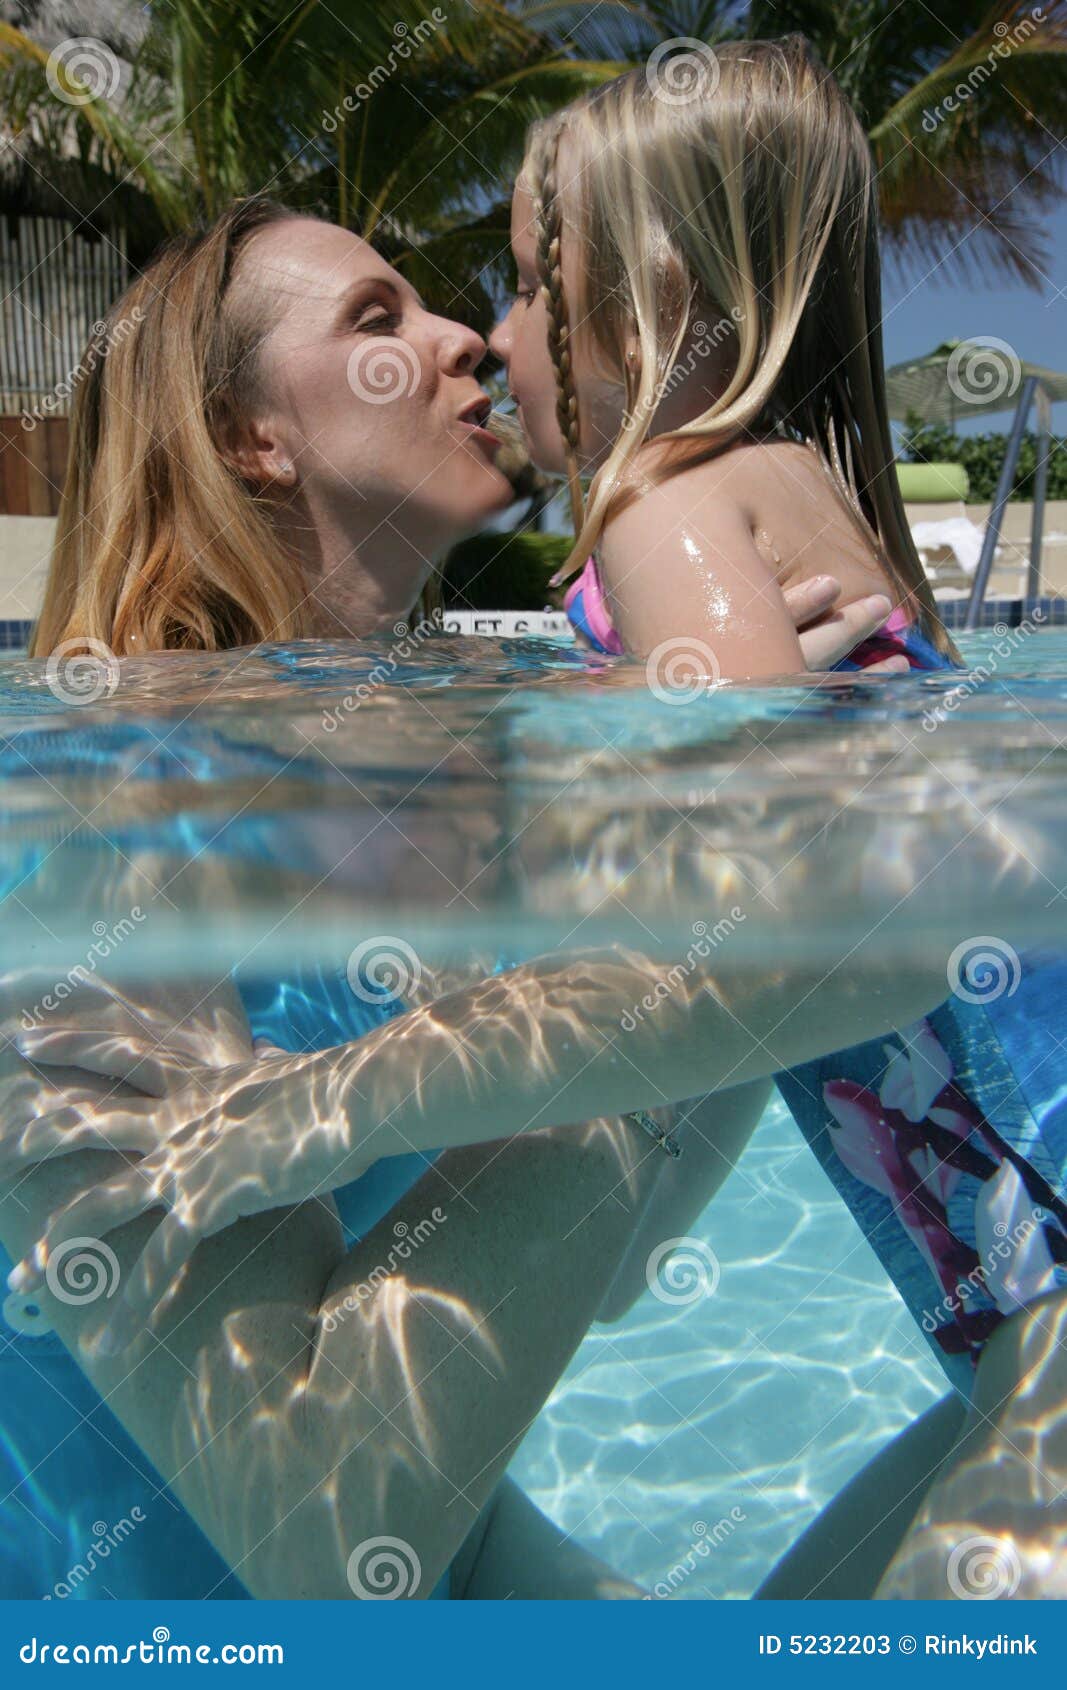 Mom and daughter hot kissing